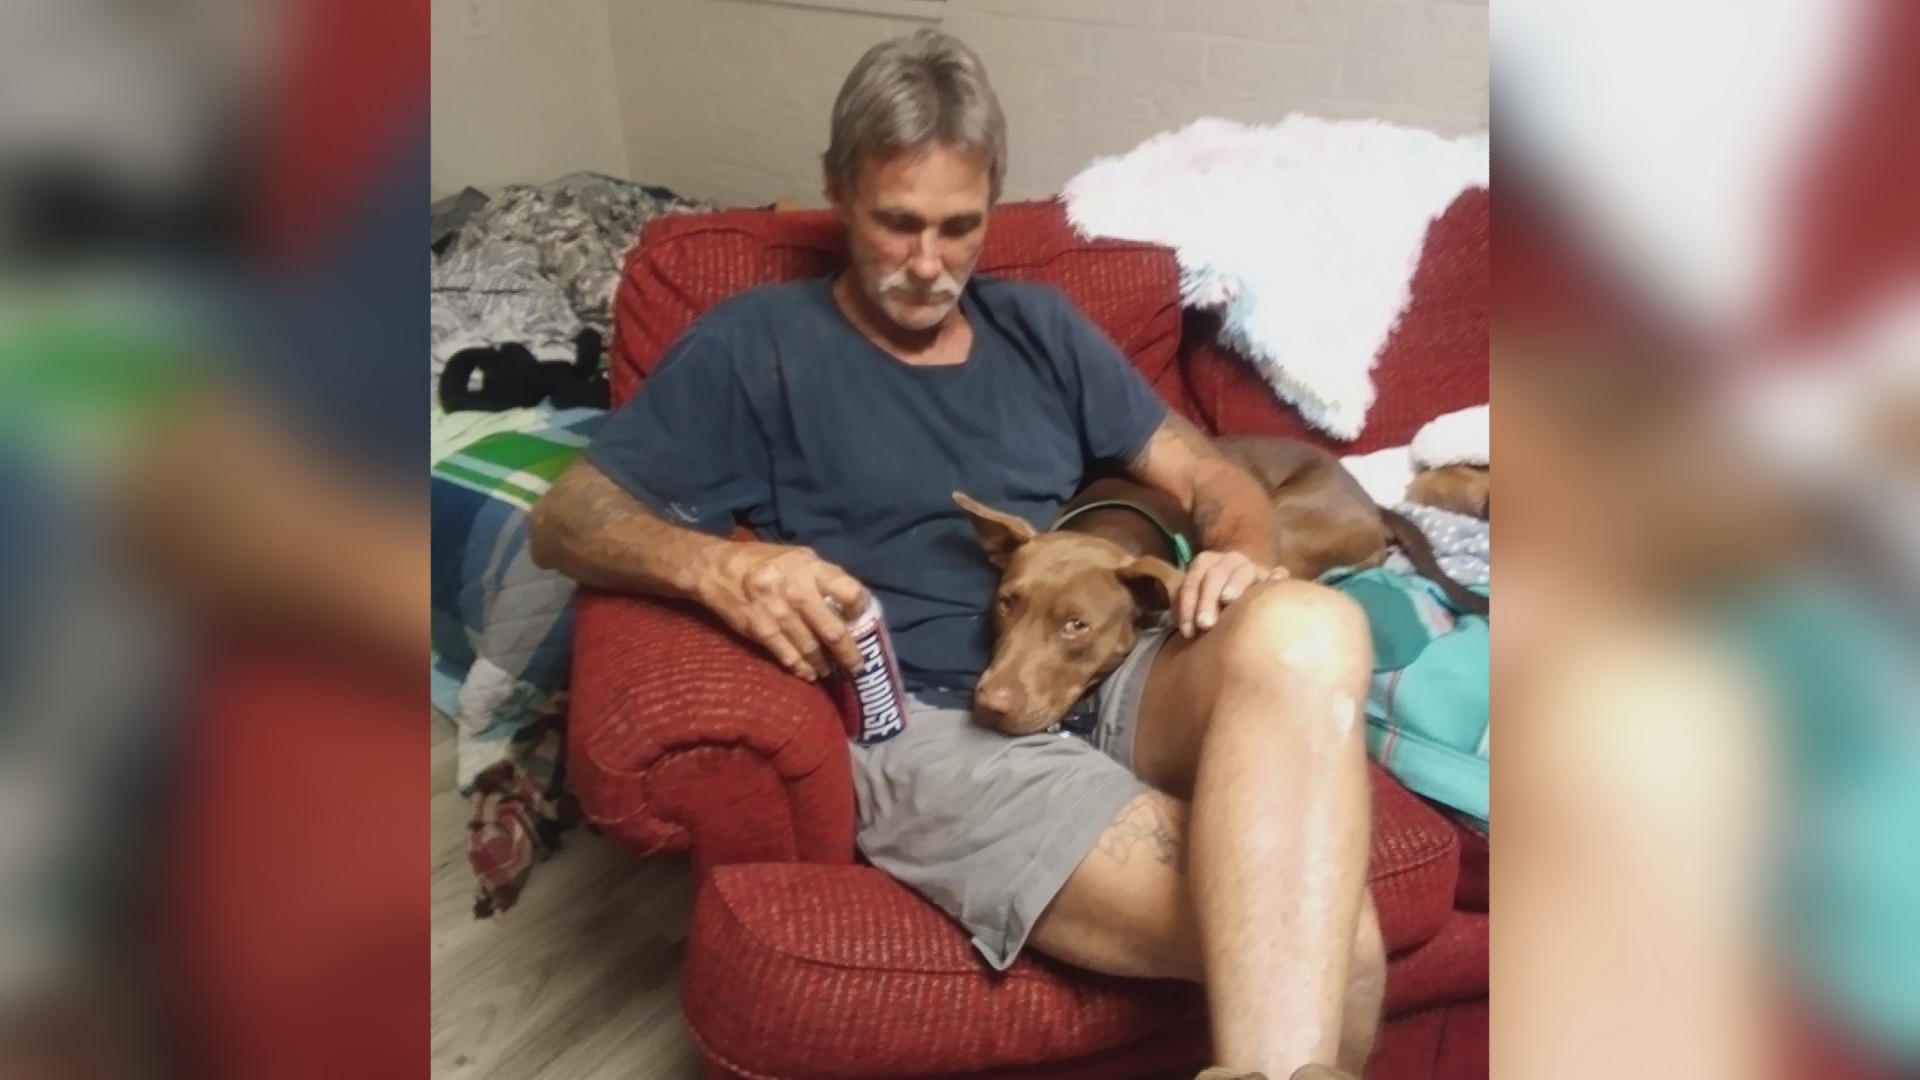 Mike Roland asked a friend to take care of his 3-year-old puppy, Bubba. A week later, Roland found the dog dead inside a hot car.